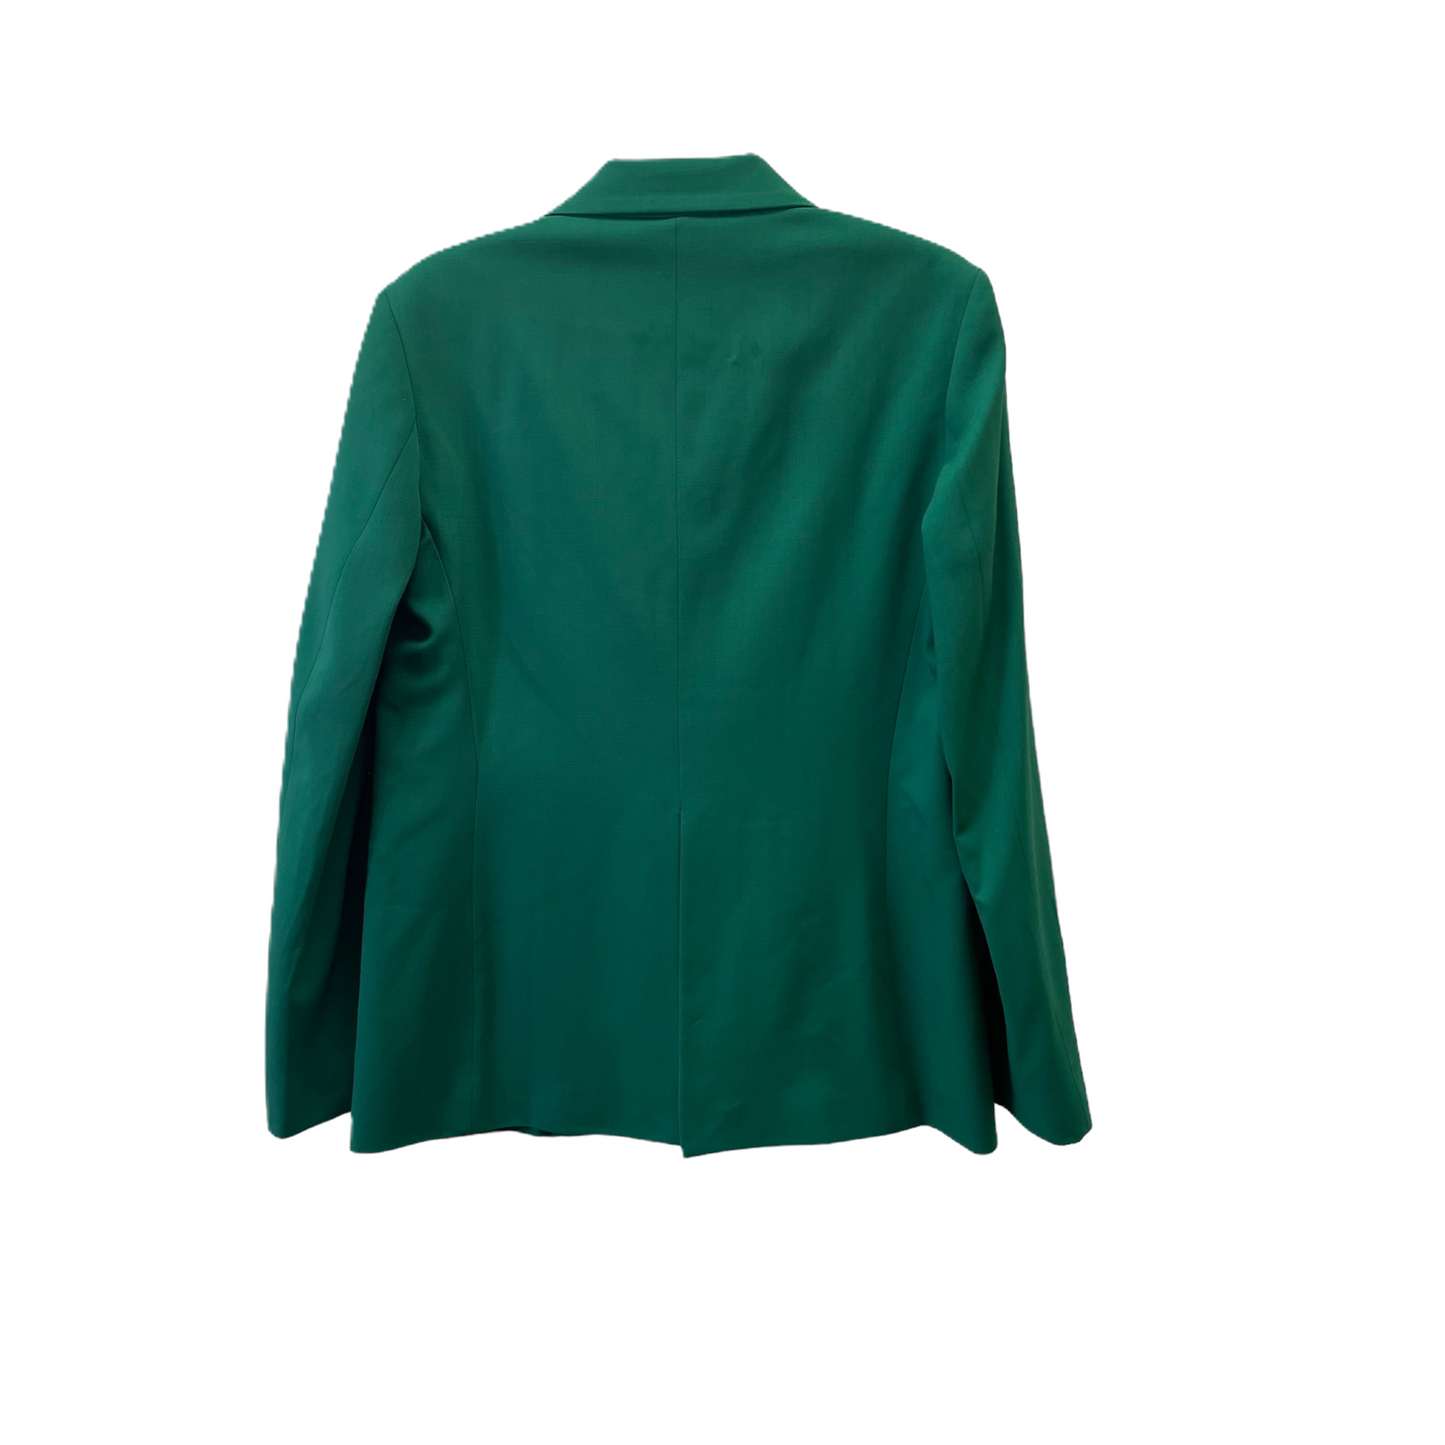 Green Skirt Suit 2pc By Zara, Size: 10